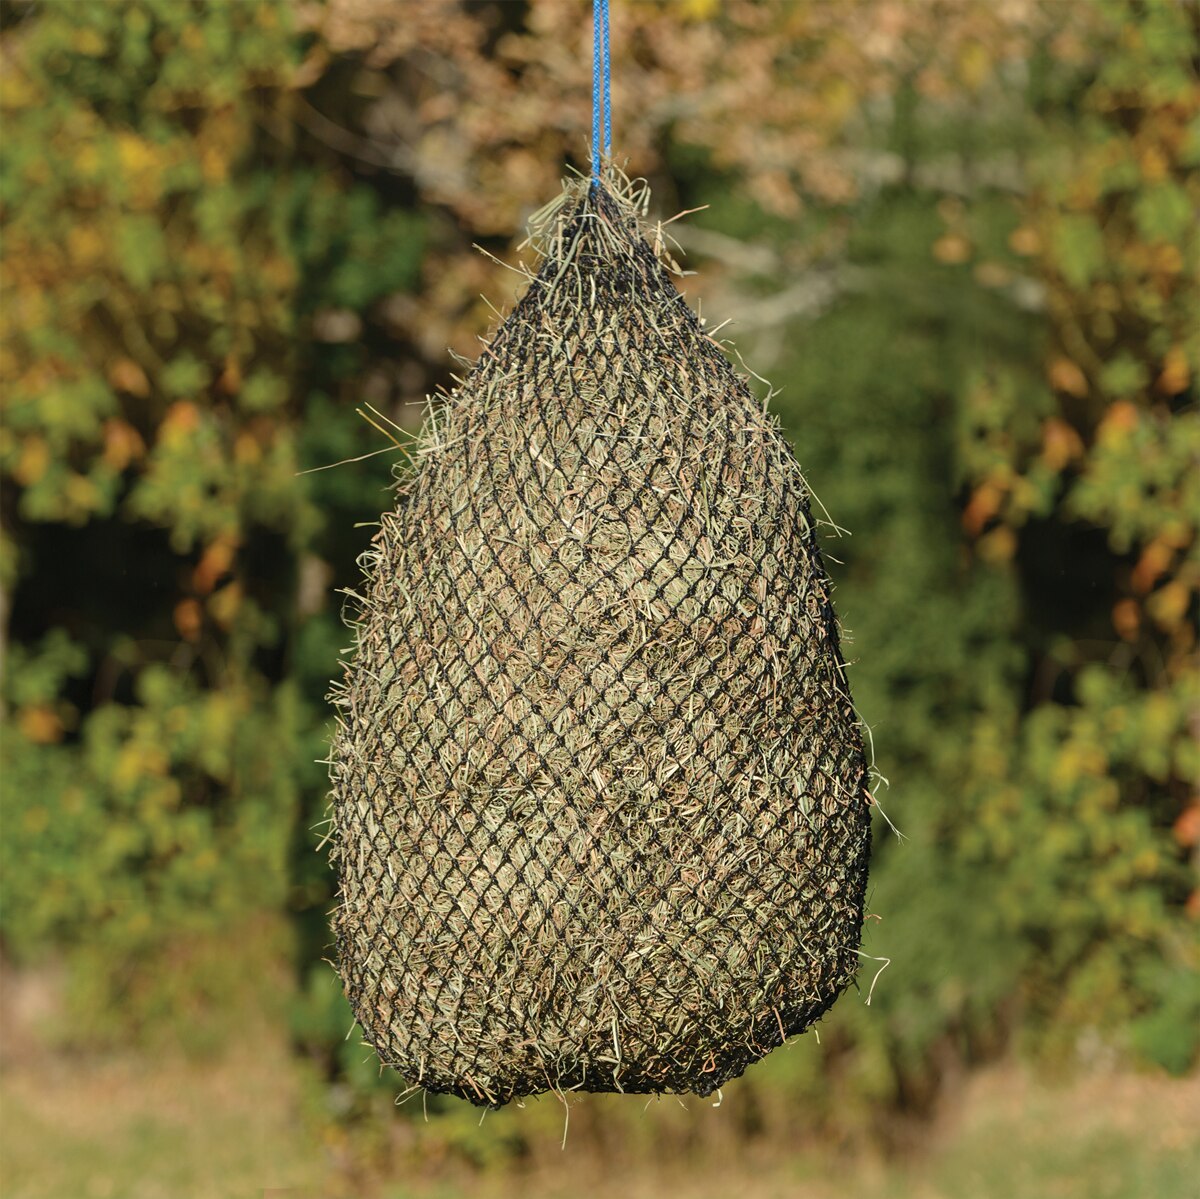 Equipride LARGE SLOW FEED HAY NET GREEDY FEEDER WITH 3 CM OPENING EXTRA SMALL HOLES BLACK